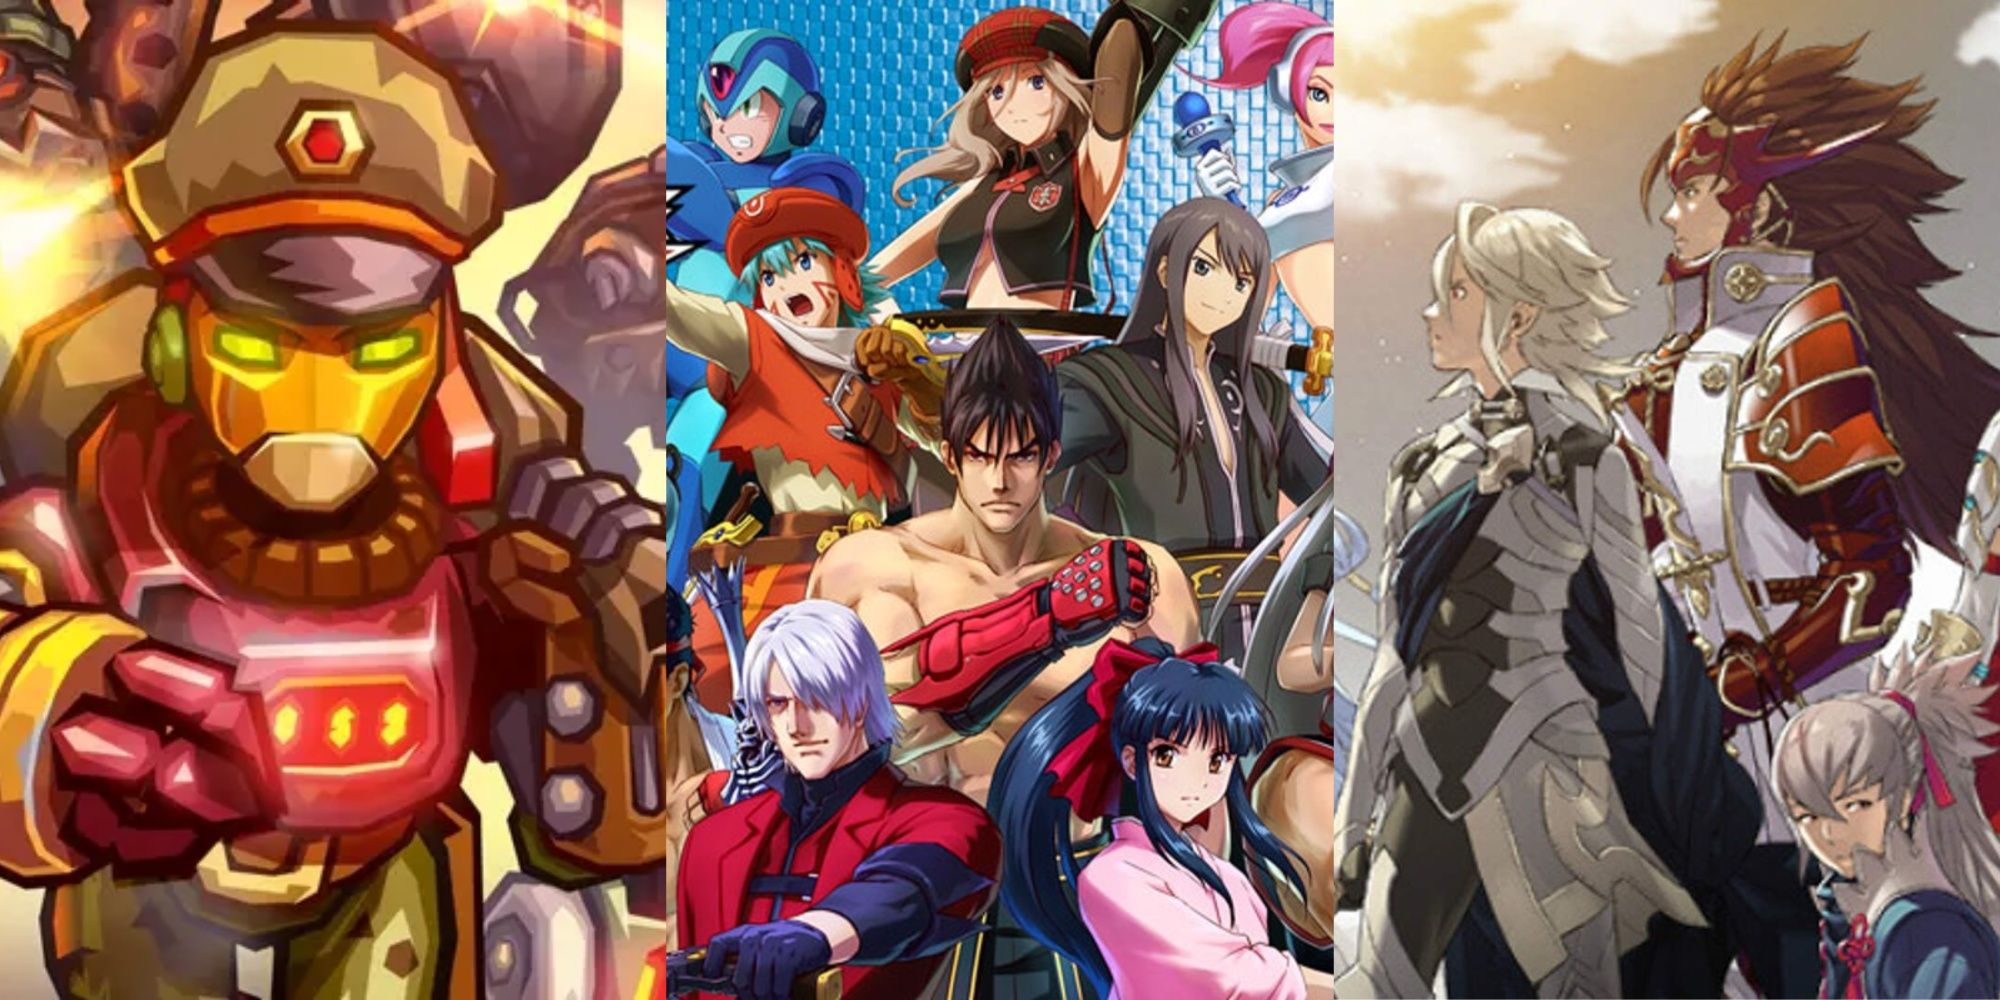 A collage image showing Captain Piper Faraday in Steamworld Heist, the cast of Project XZone Characters, and Corrin and Ryoma in Fire Emblem Fates.